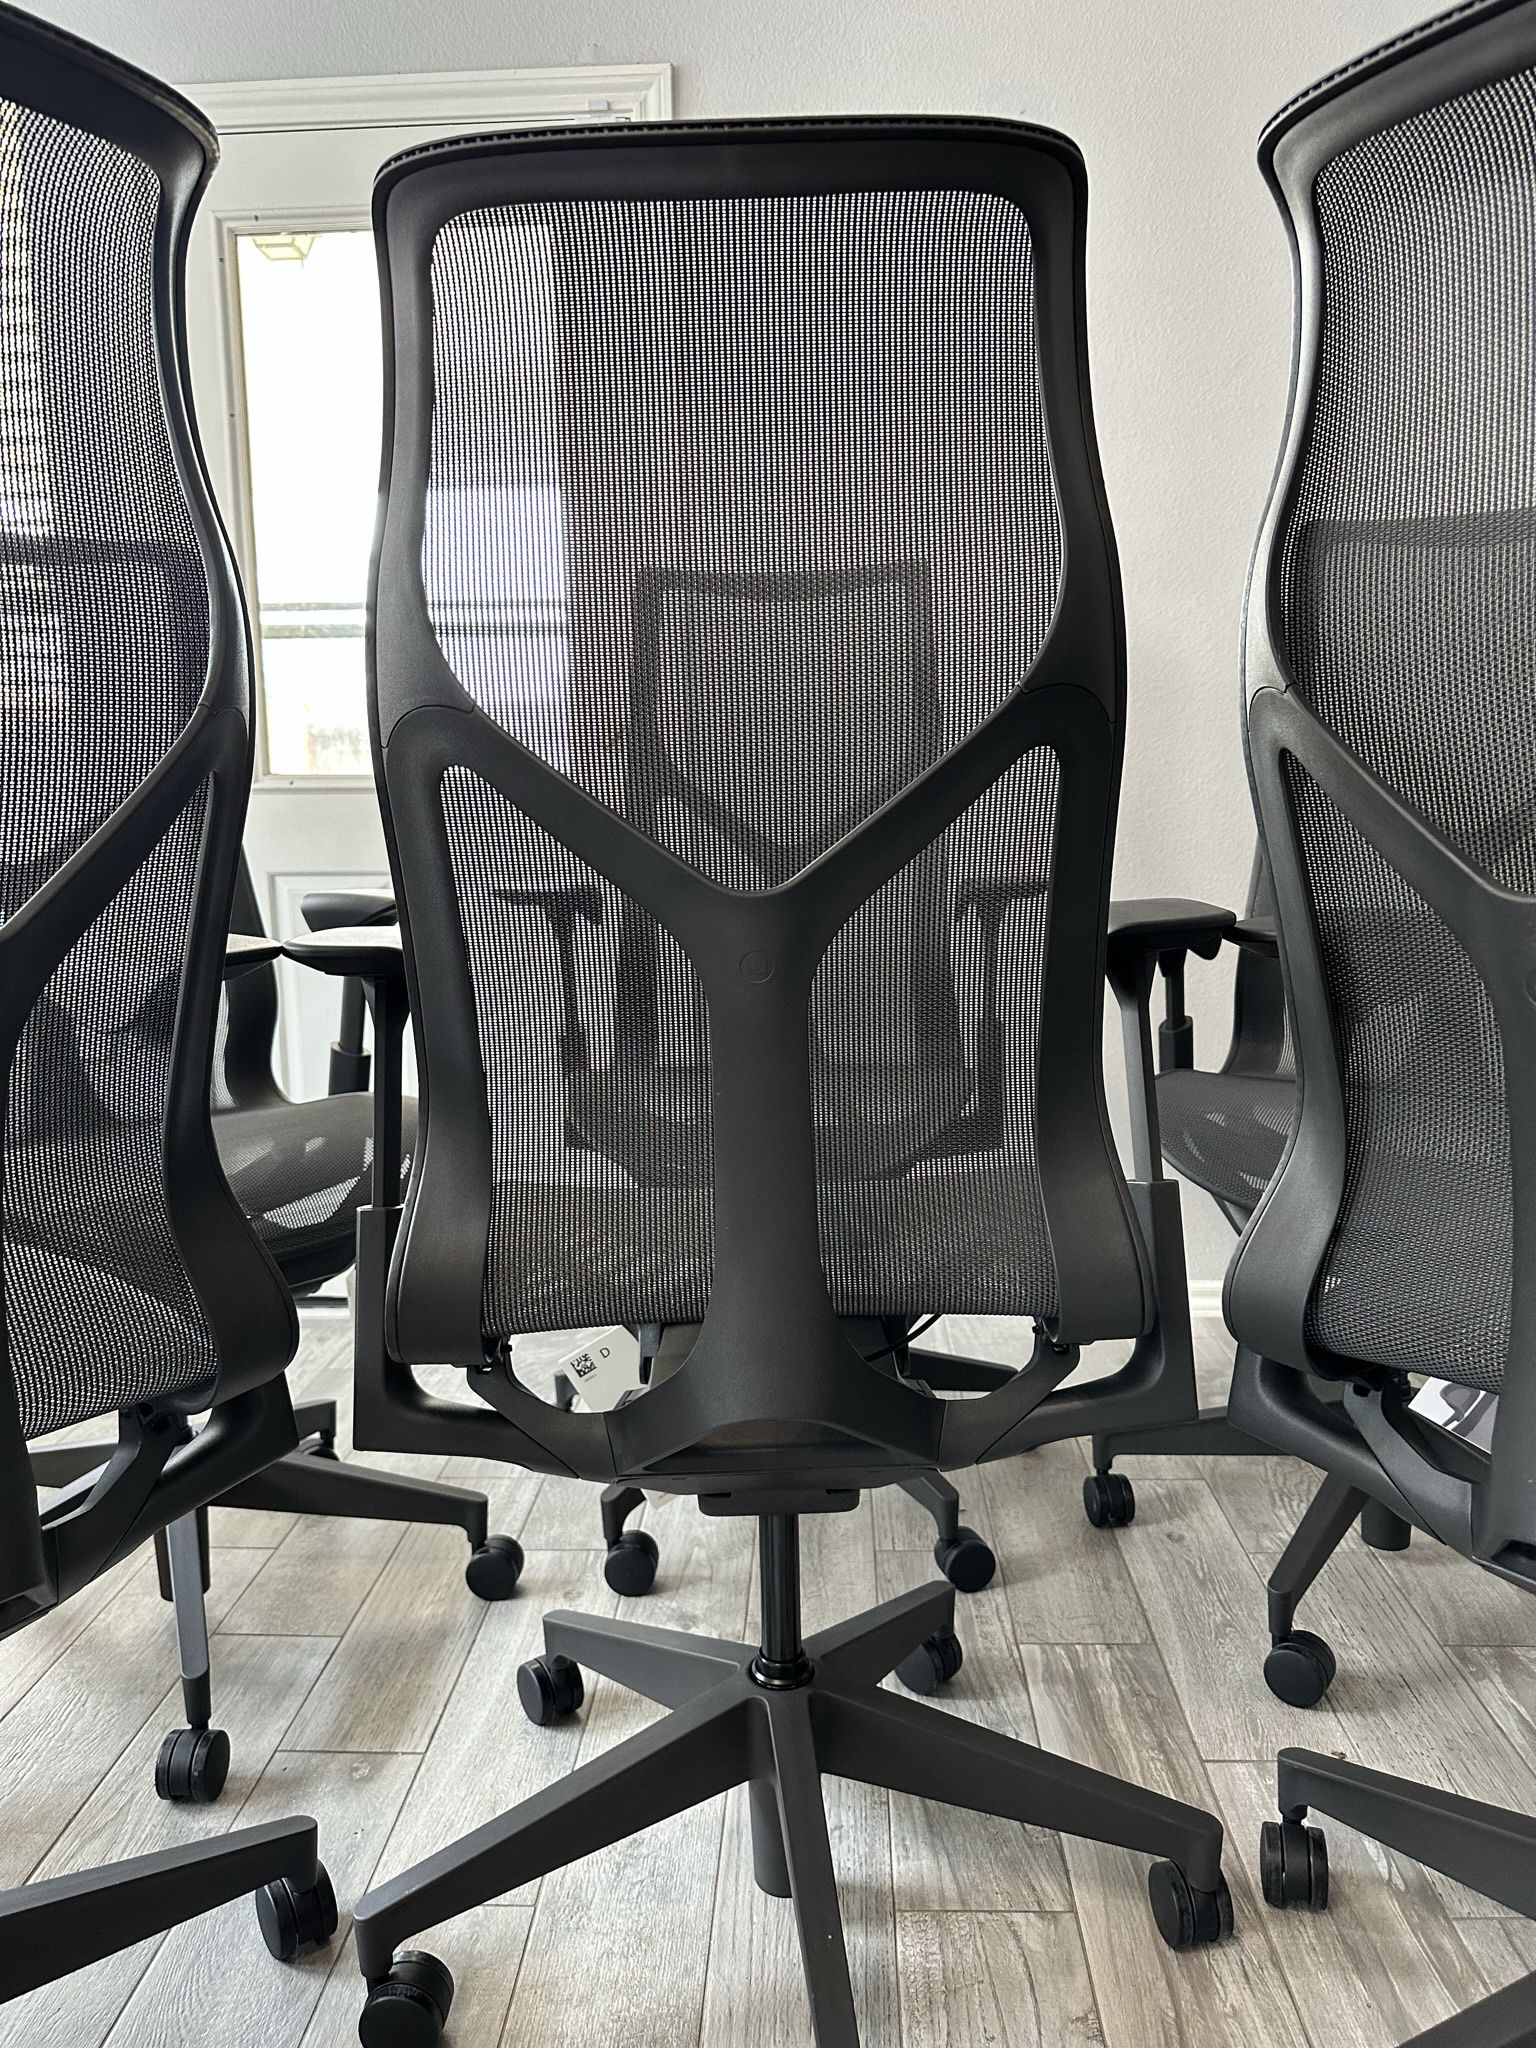 🔥50% OFF BRAND NEW HERMAN MILLER COSM CHAIR HIGH BACK FULLY LOADED 2023 🔥 $995.